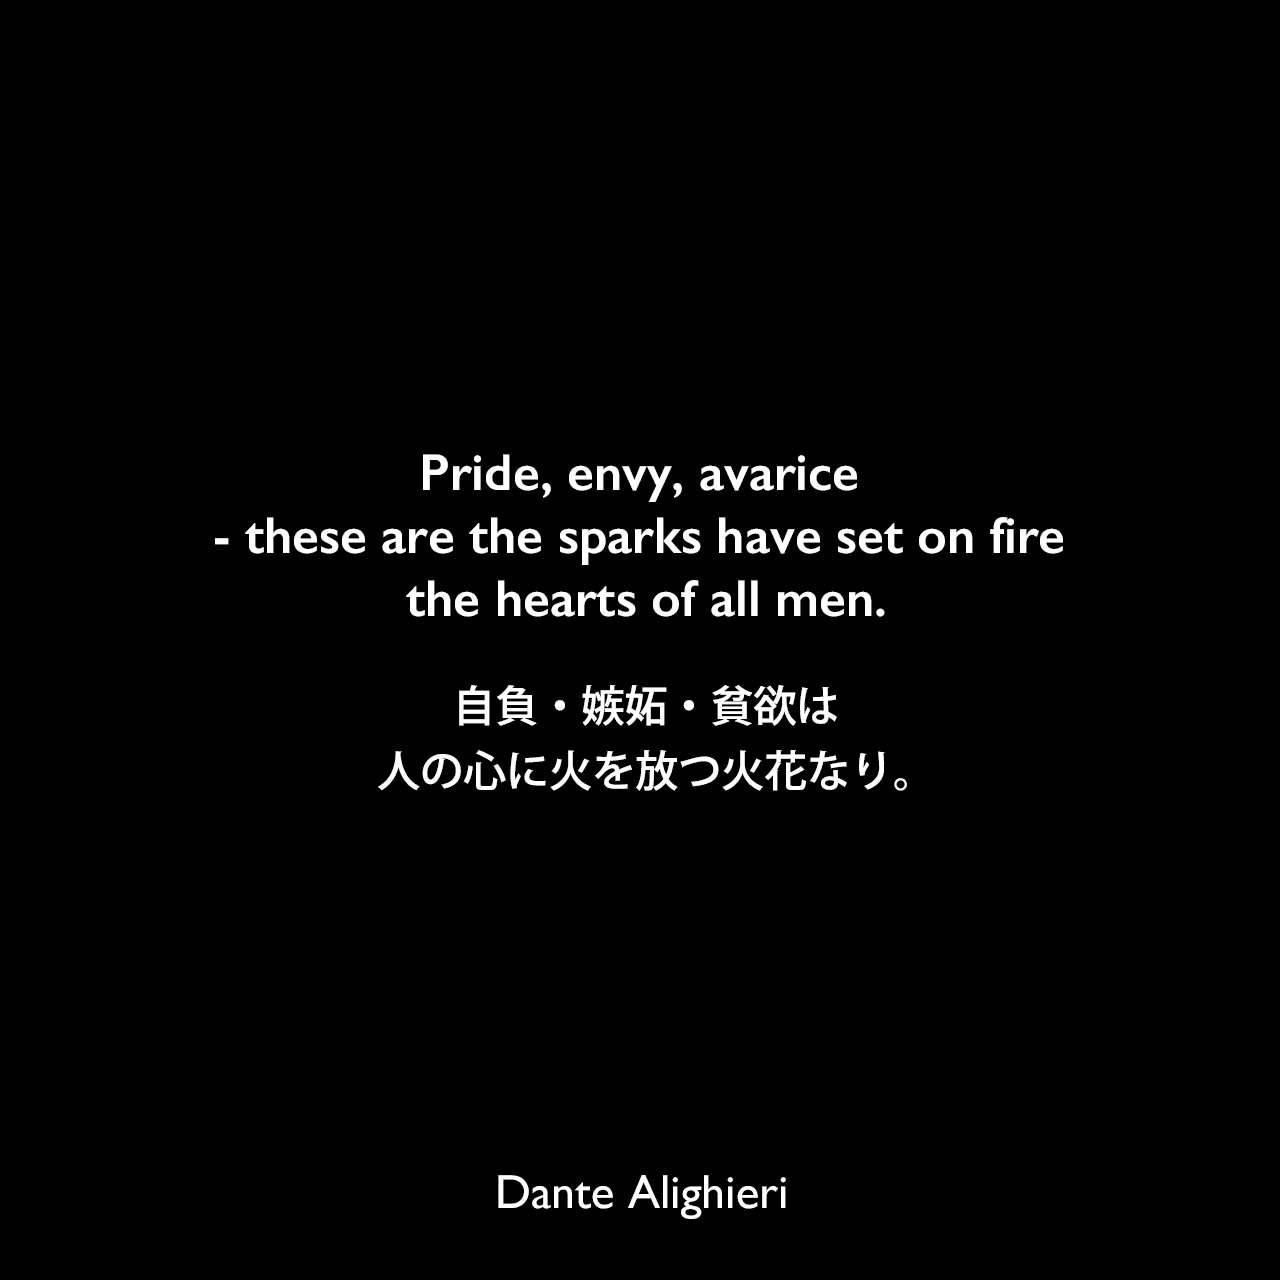 Pride, envy, avarice - these are the sparks have set on fire the hearts of all men.自負・嫉妬・貧欲は、人の心に火を放つ火花なり。Dante Alighieri